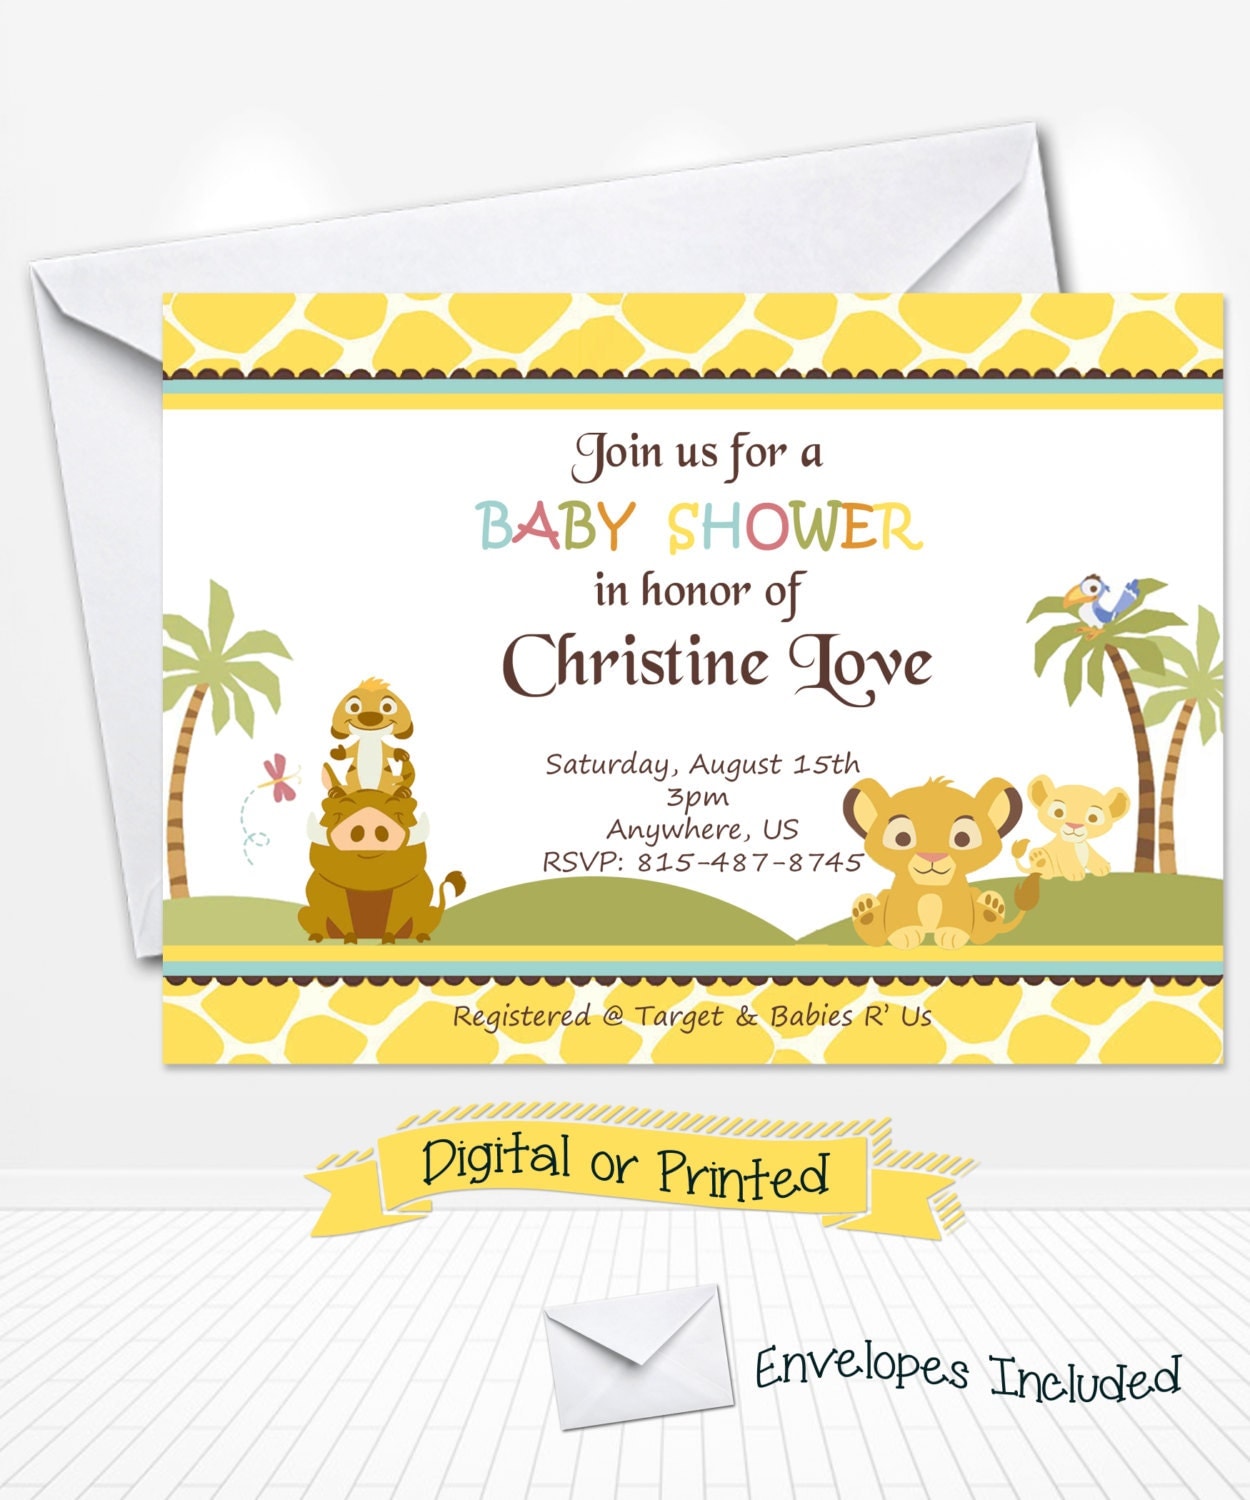 simba-lion-king-baby-shower-invitations-printed-by-andabloshop